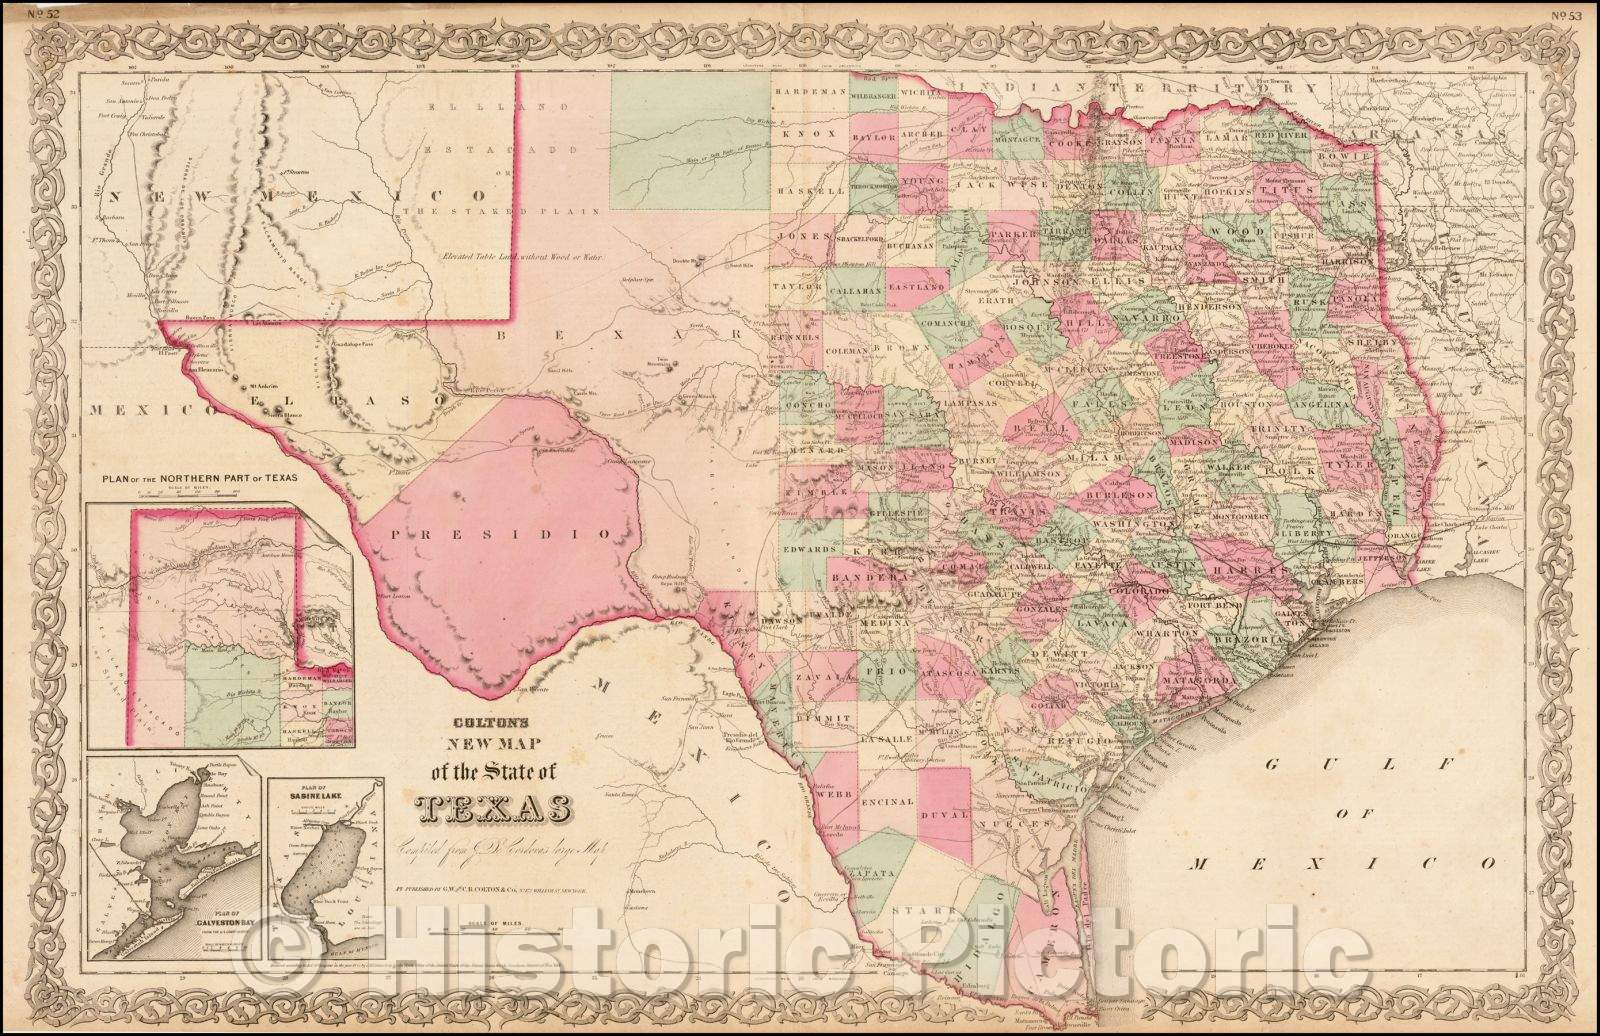 Historic Map - Colton's New Map of the State of Texas, 1856, Joseph Hutchins Colton v2